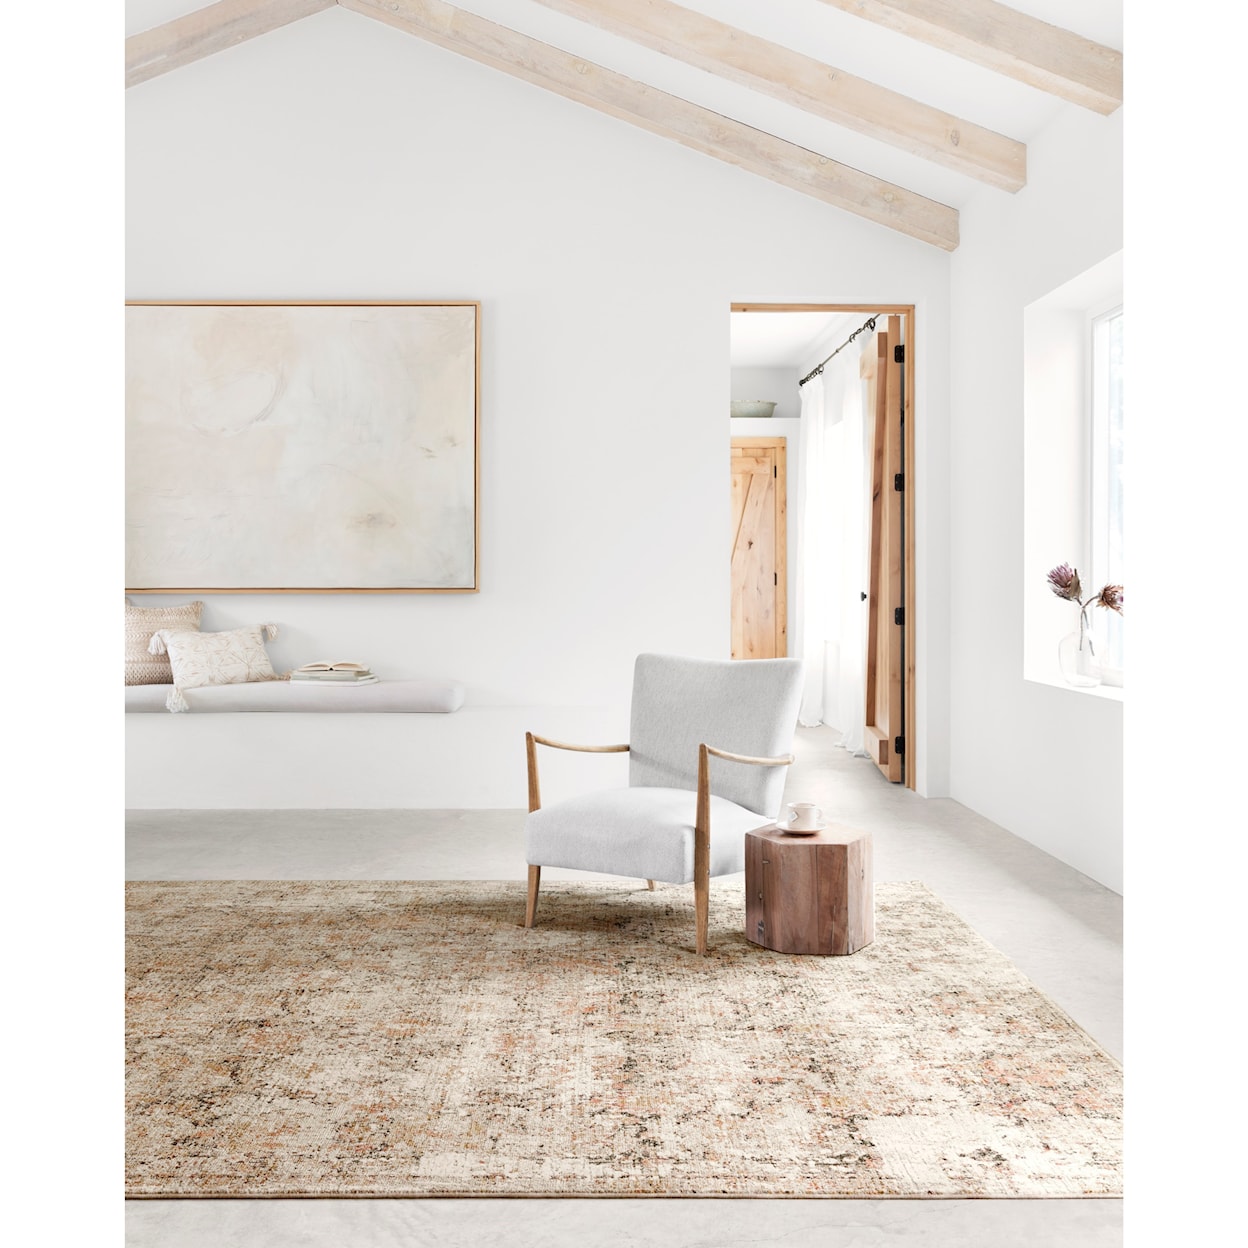 Reeds Rugs Theia 6'7" x 9'6" Taupe / Gold Rug